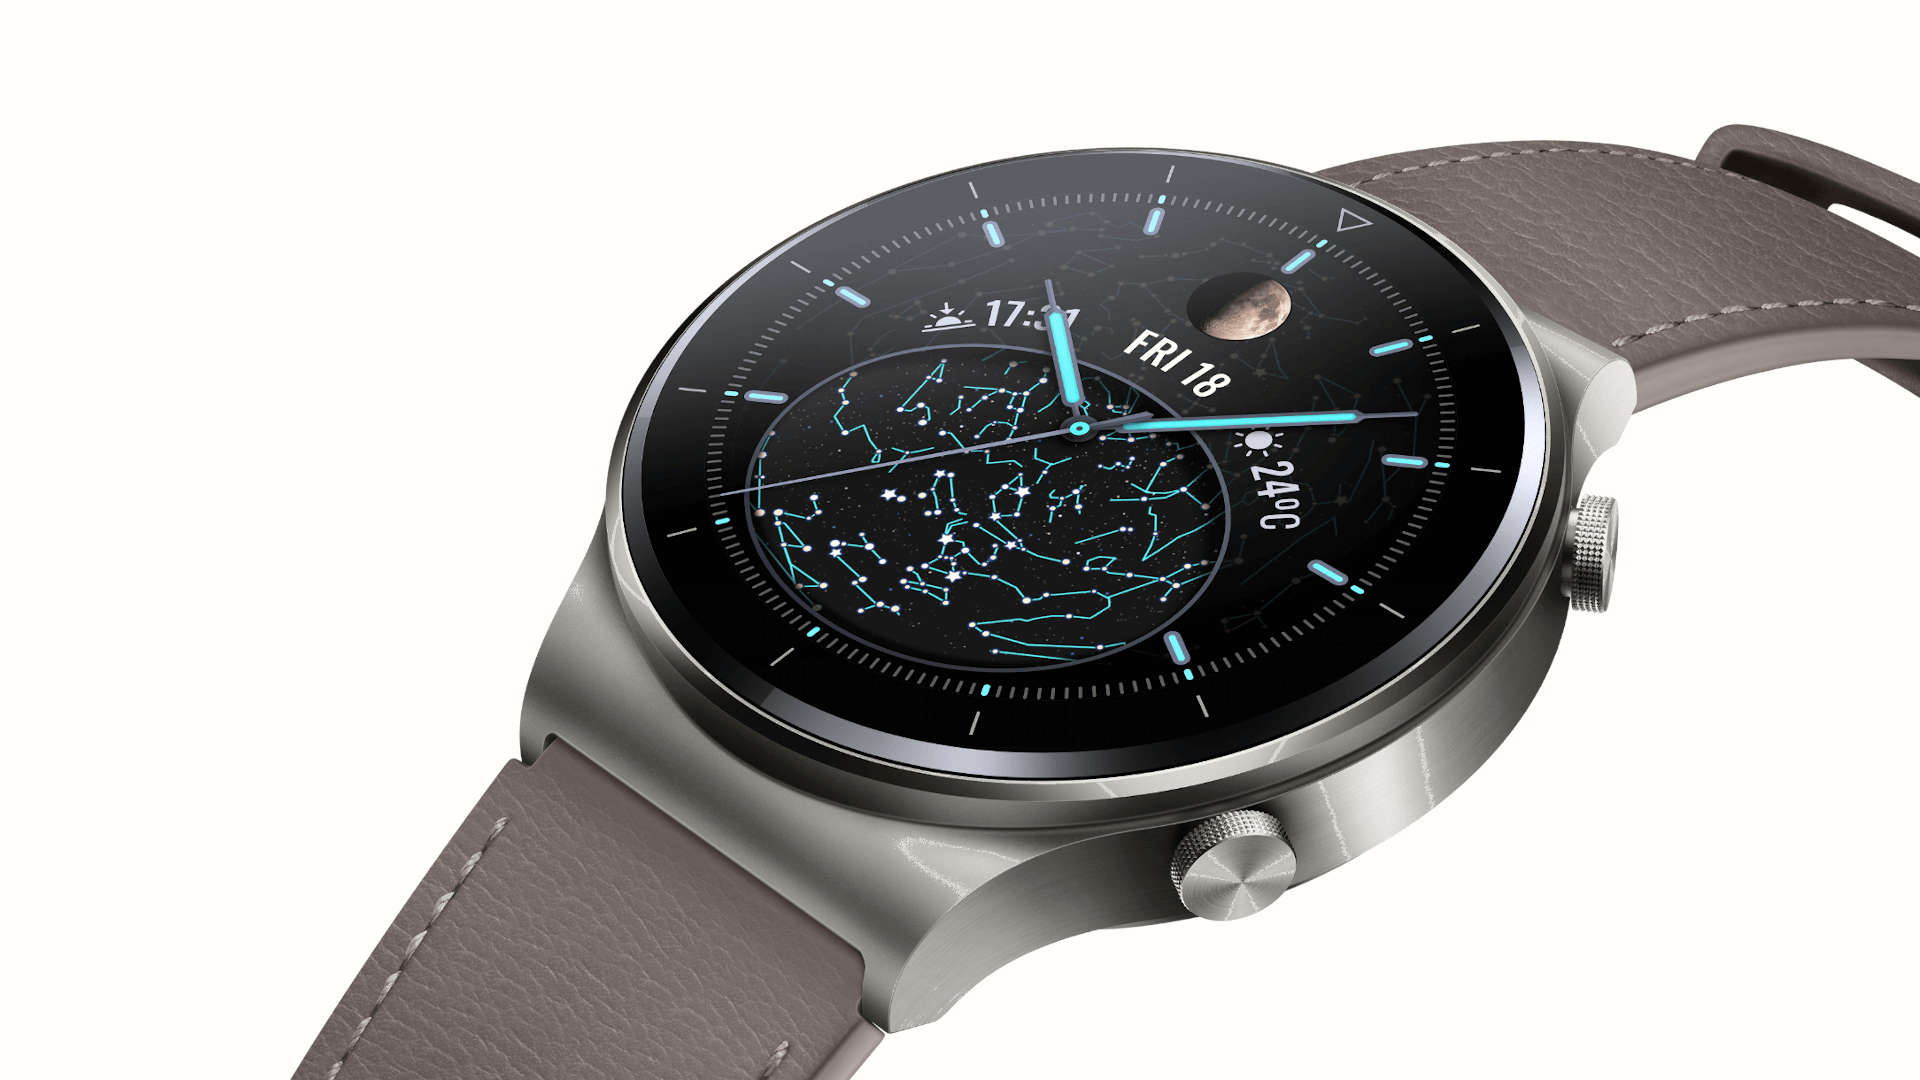 Huawei watch 4 pro space exploration edition. Huawei watch. Huawei watch gt3 Pro watchface. Huawei watch 2 Pro. Huawei watch gt 3 Elite.